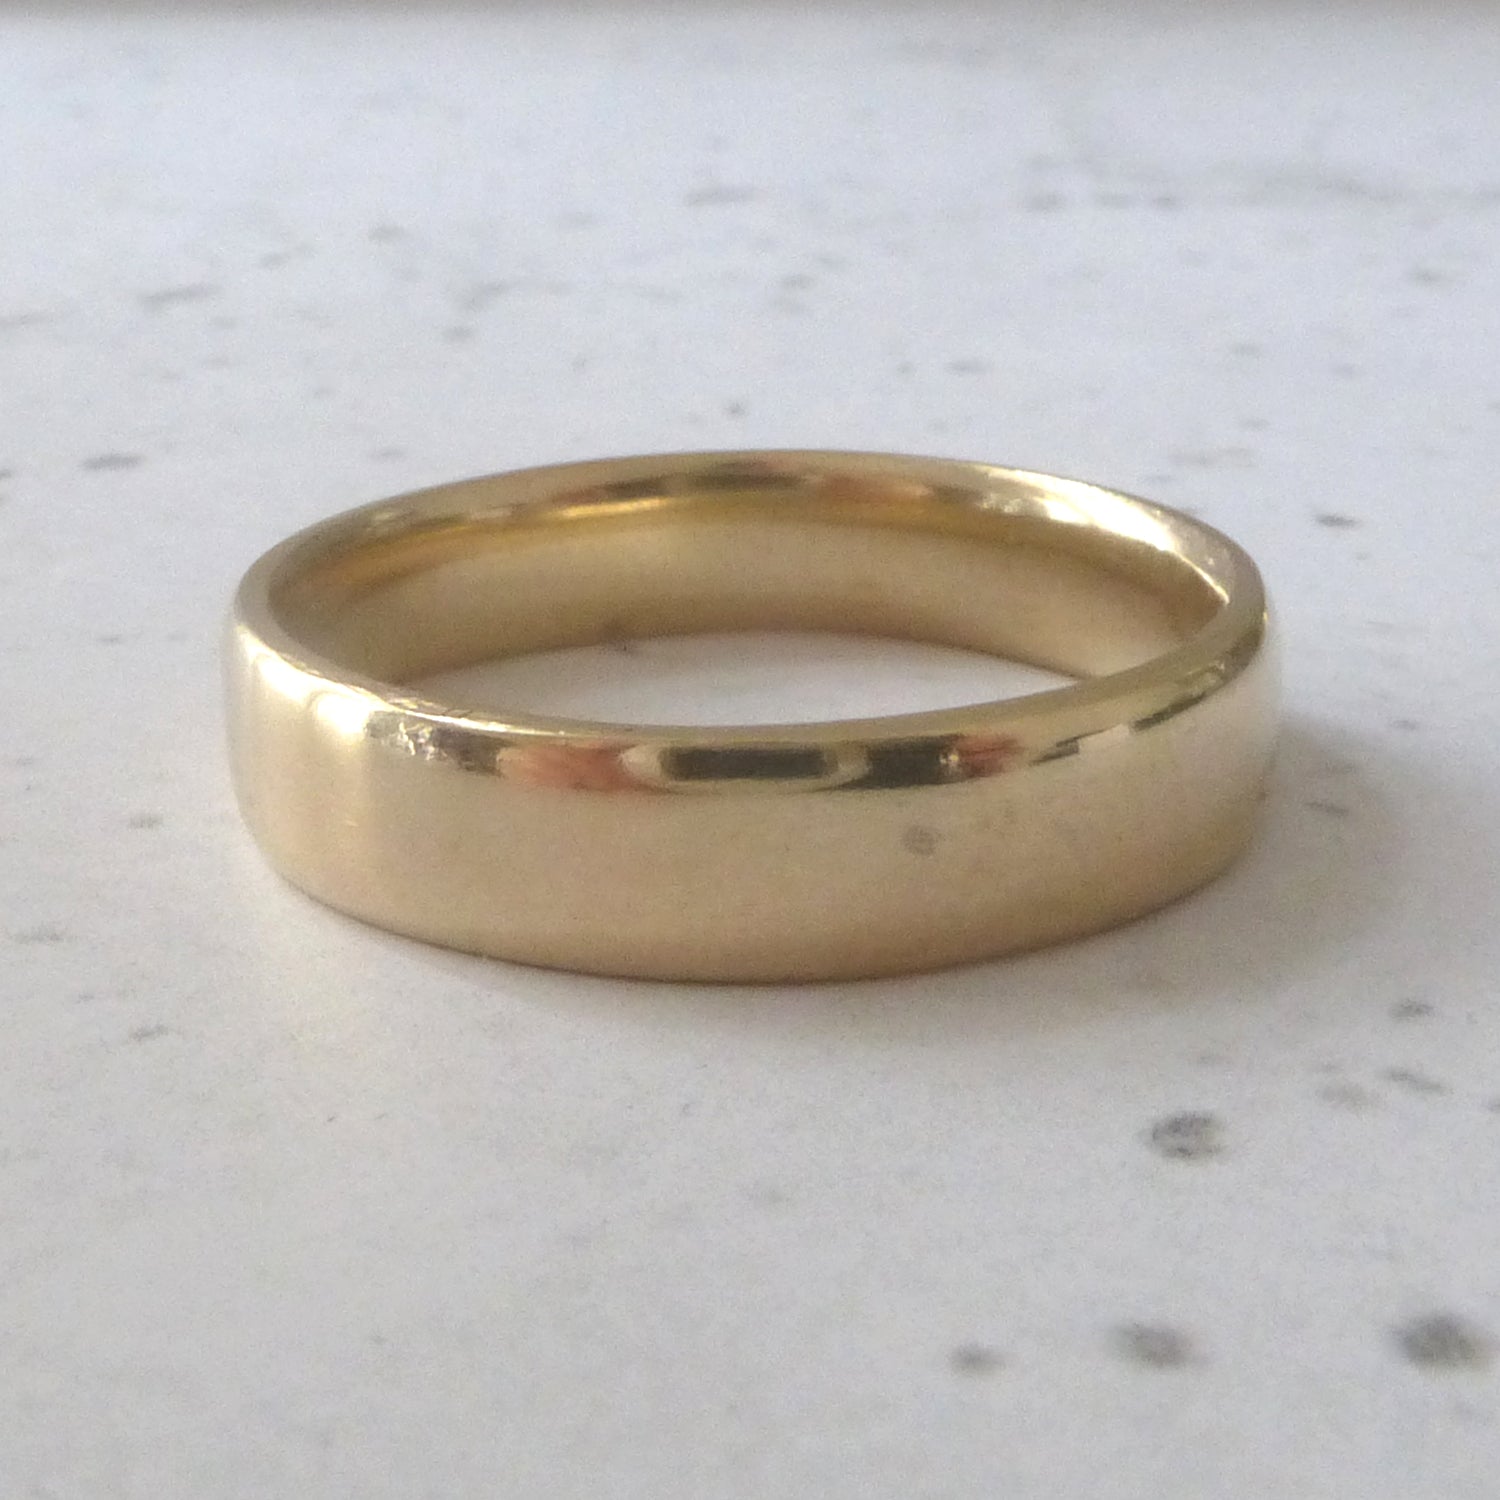 Hand made wedding ring in recycled 9ct yellow gold, soft court profile, smooth finish